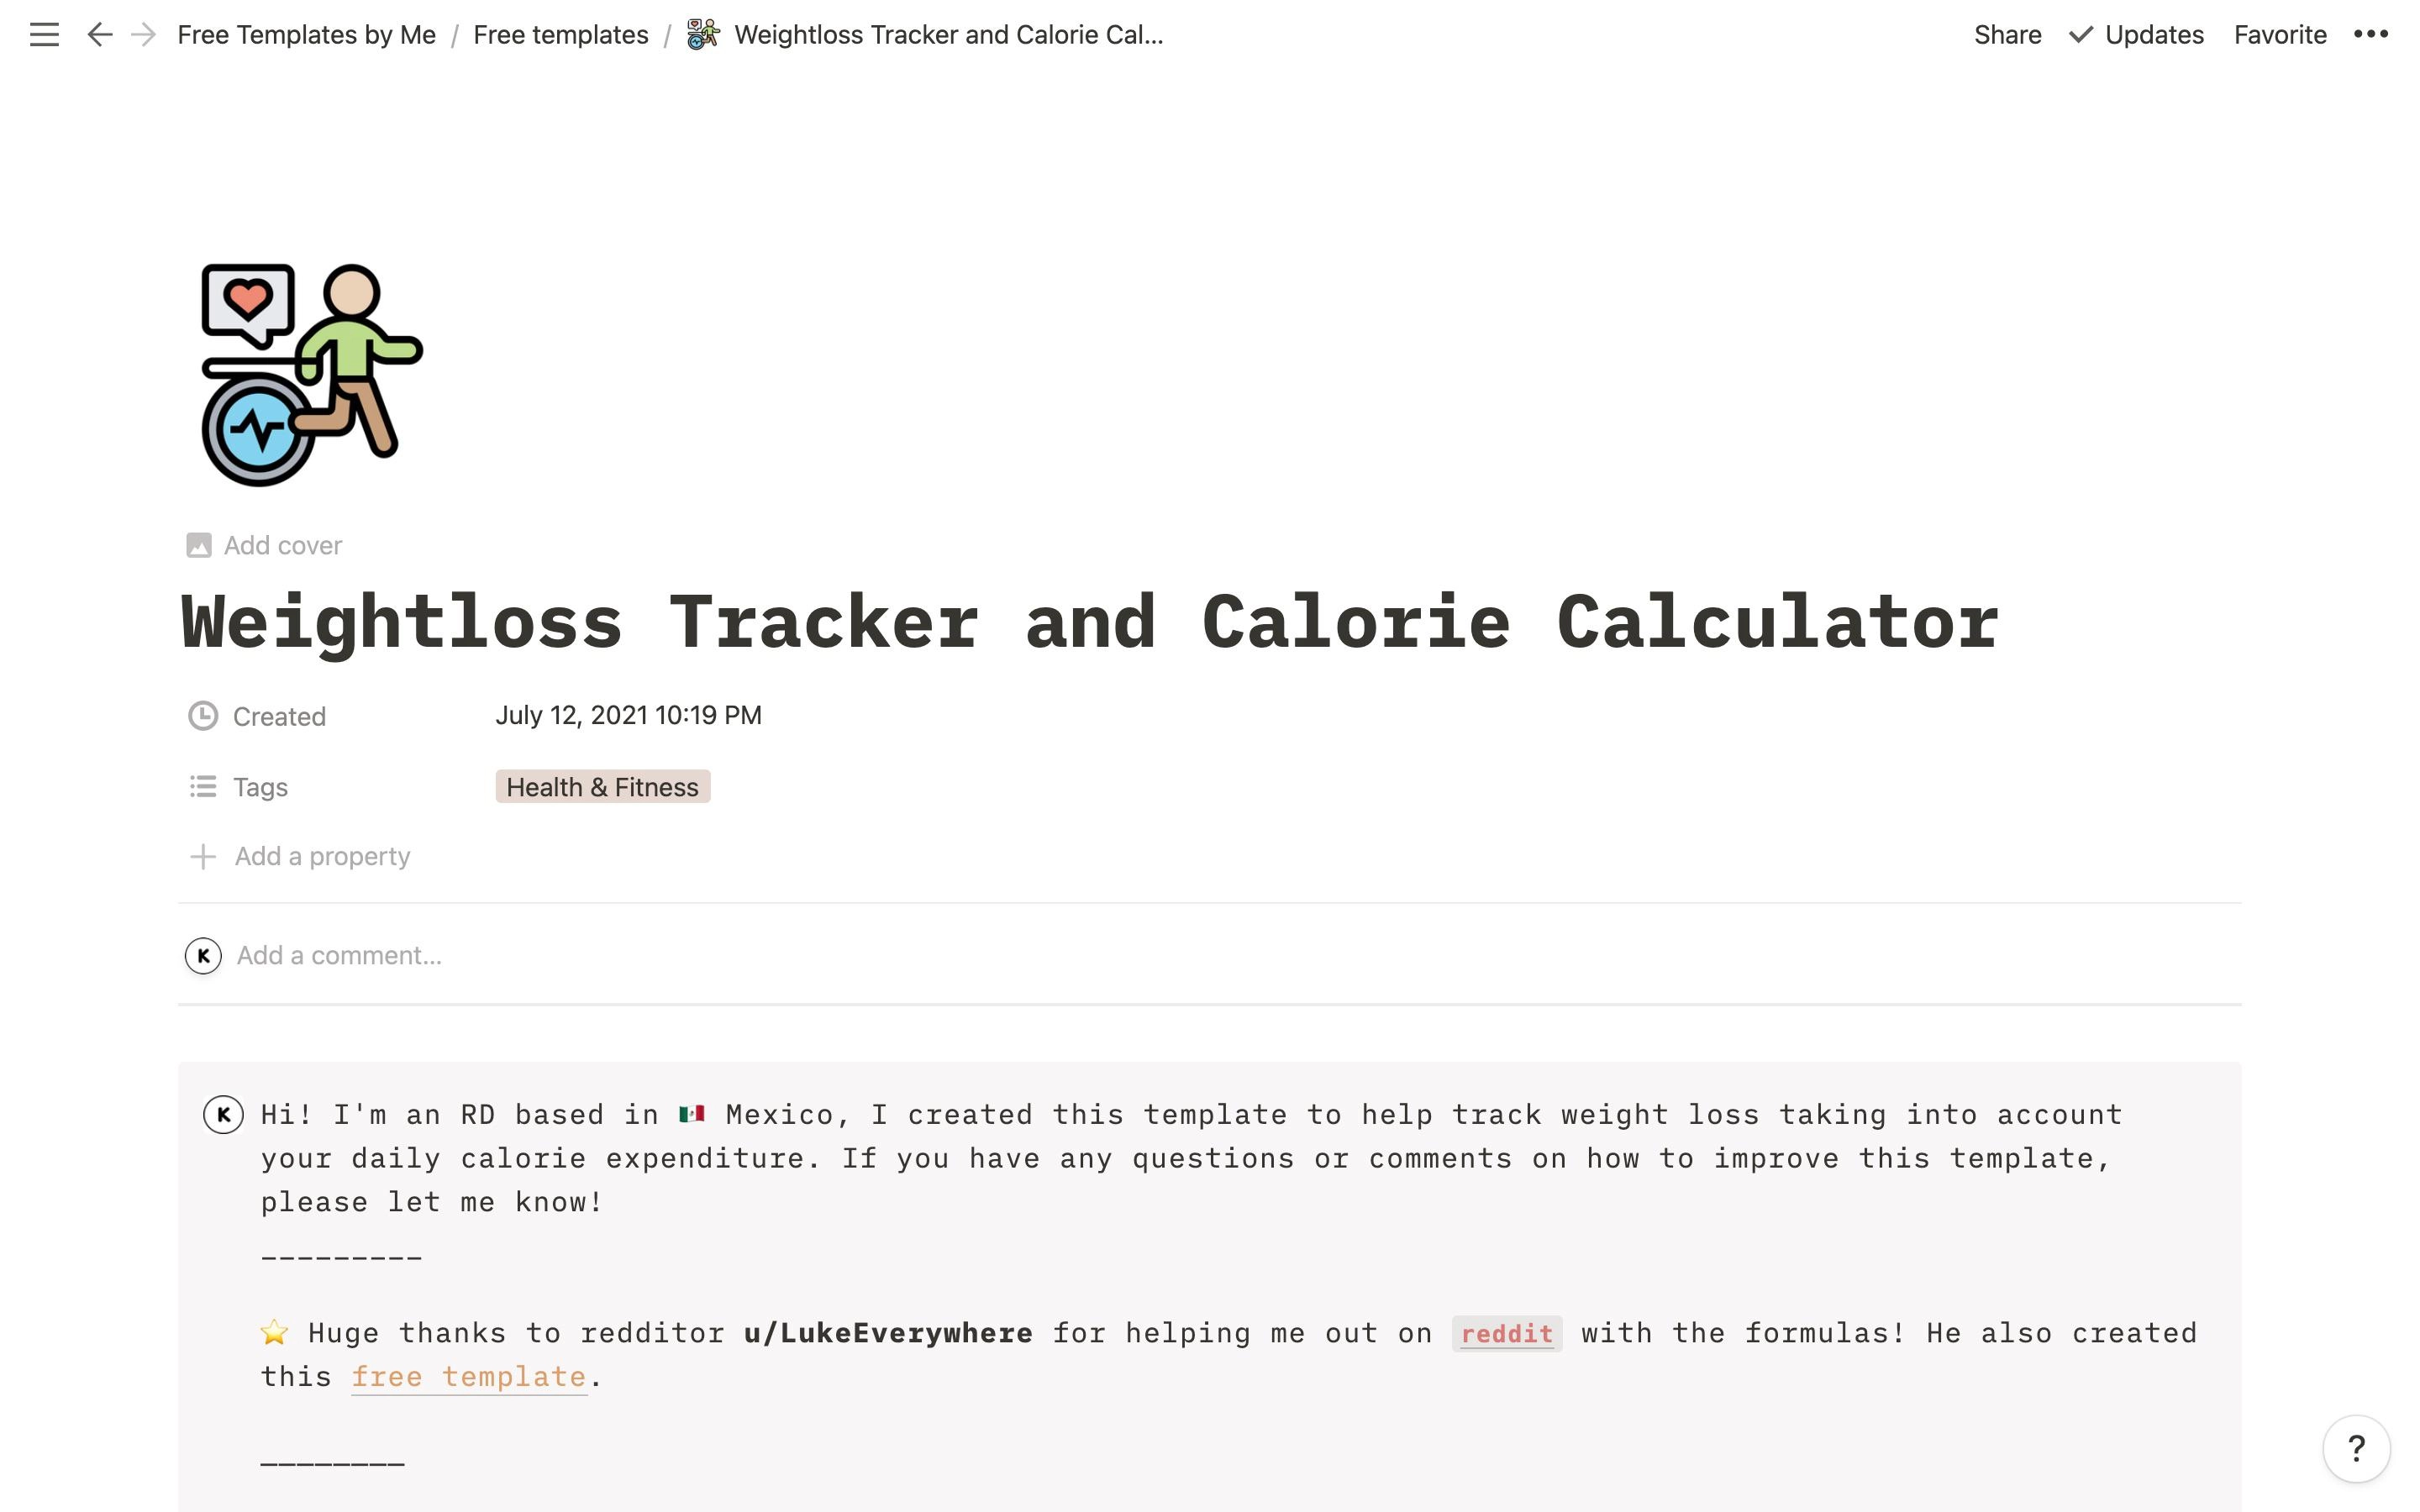 Weight Loss Tracker and Calorie Calculator